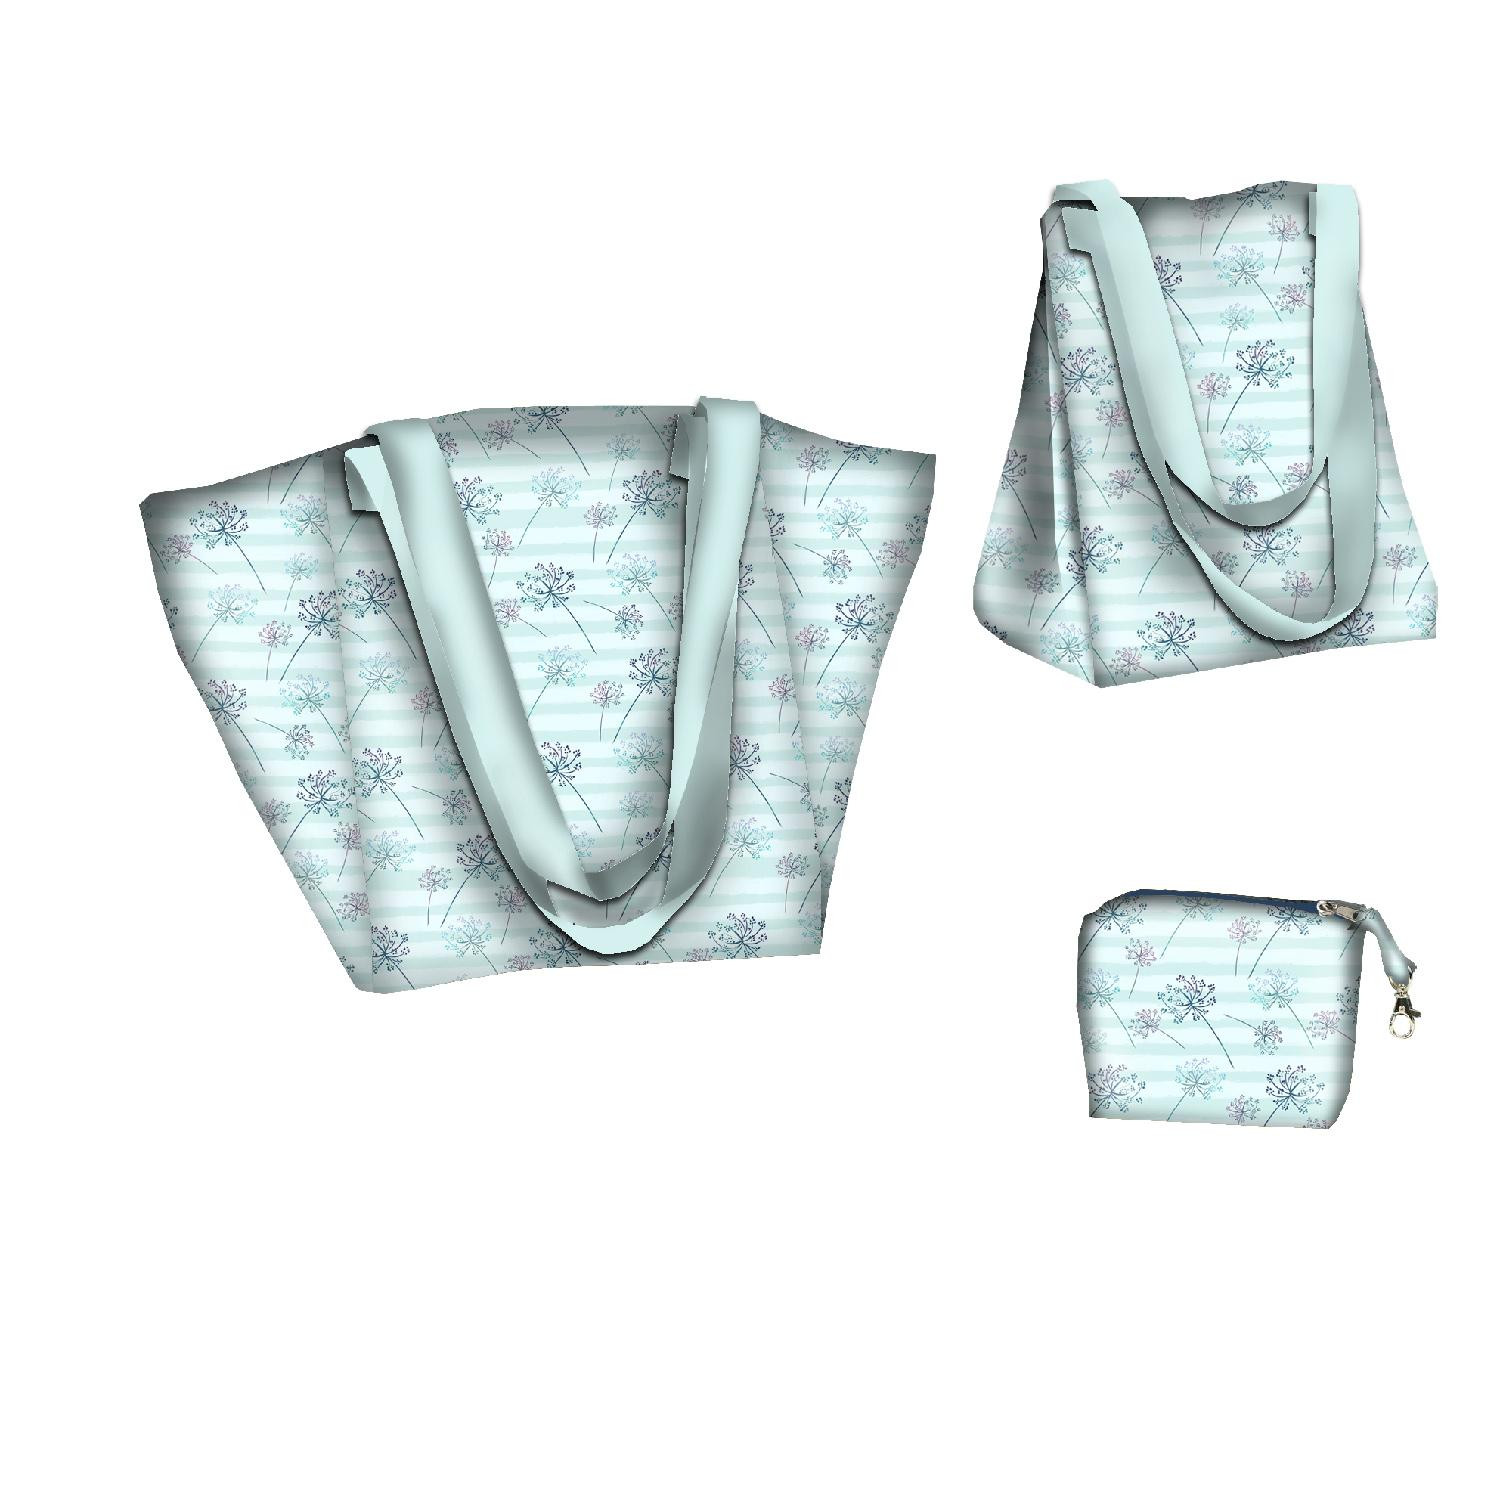 XL bag with in-bag pouch 2 in 1 - DANDELIONS / STRIPES (DRAGONFLIES AND DANDELIONS) - sewing set